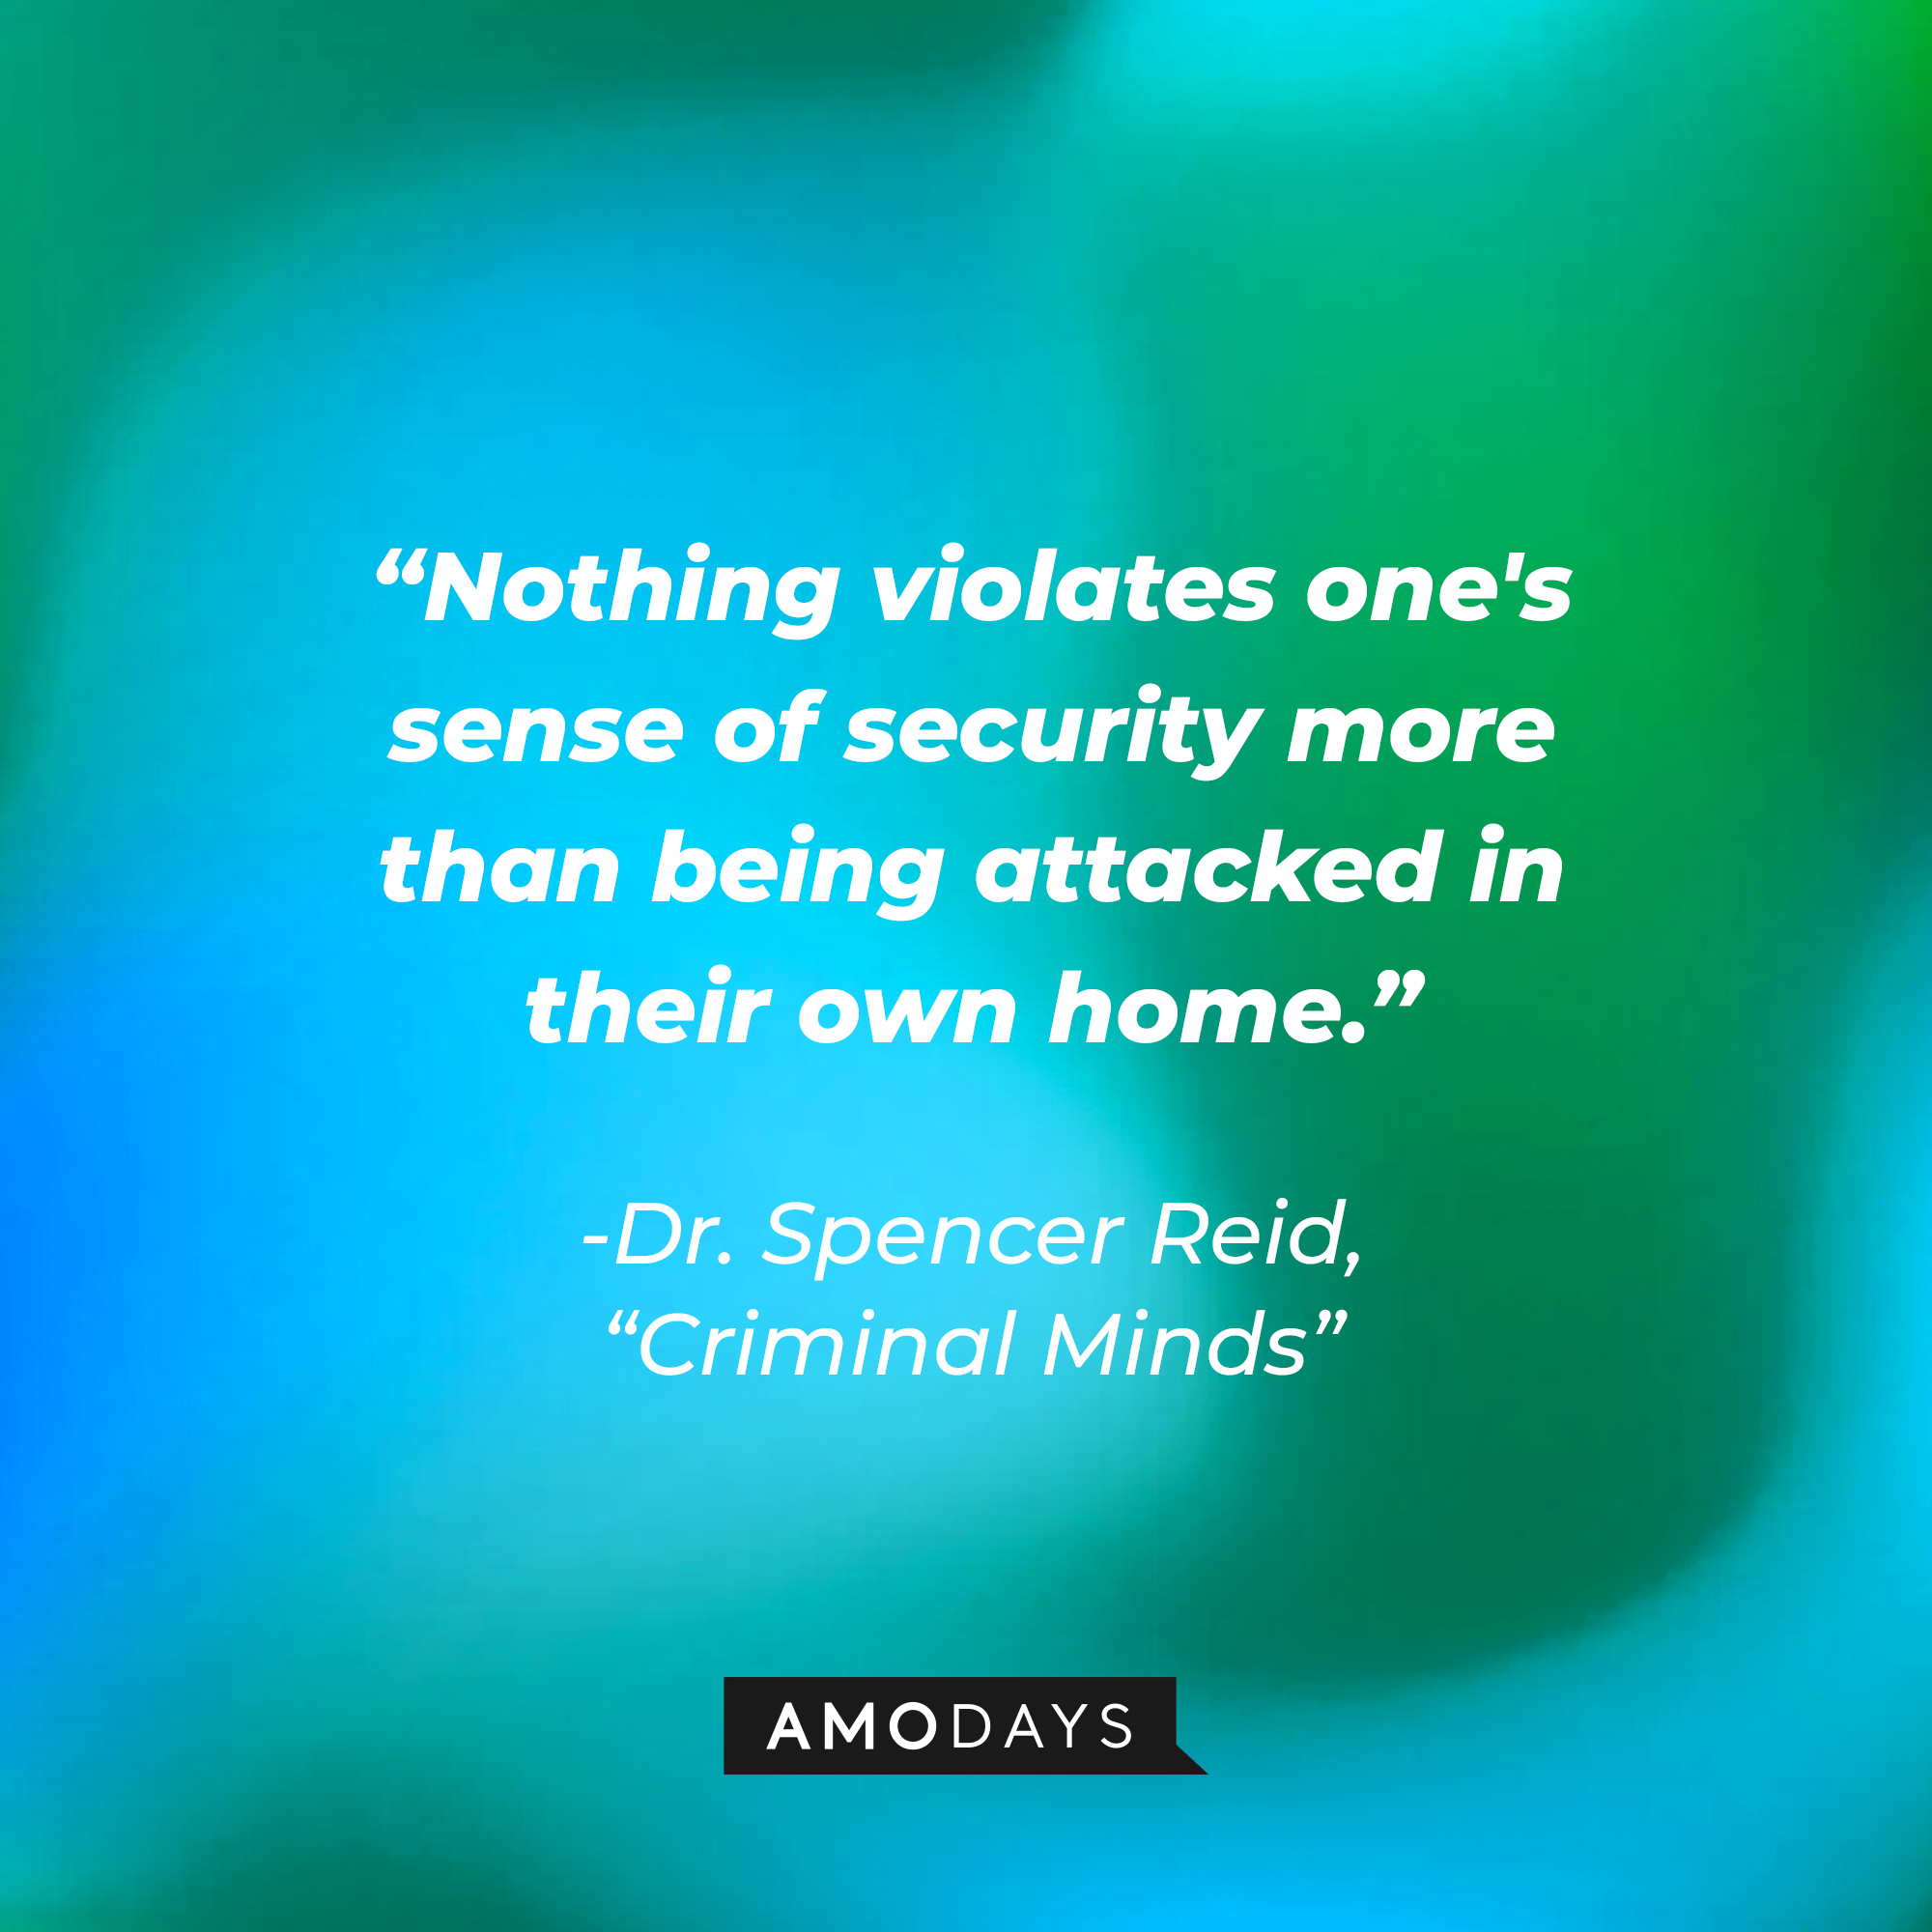 Dr. Spencer Reid's quote: “Nothing violates one's sense of security more than being attacked in their own home.” | Source: Amodays